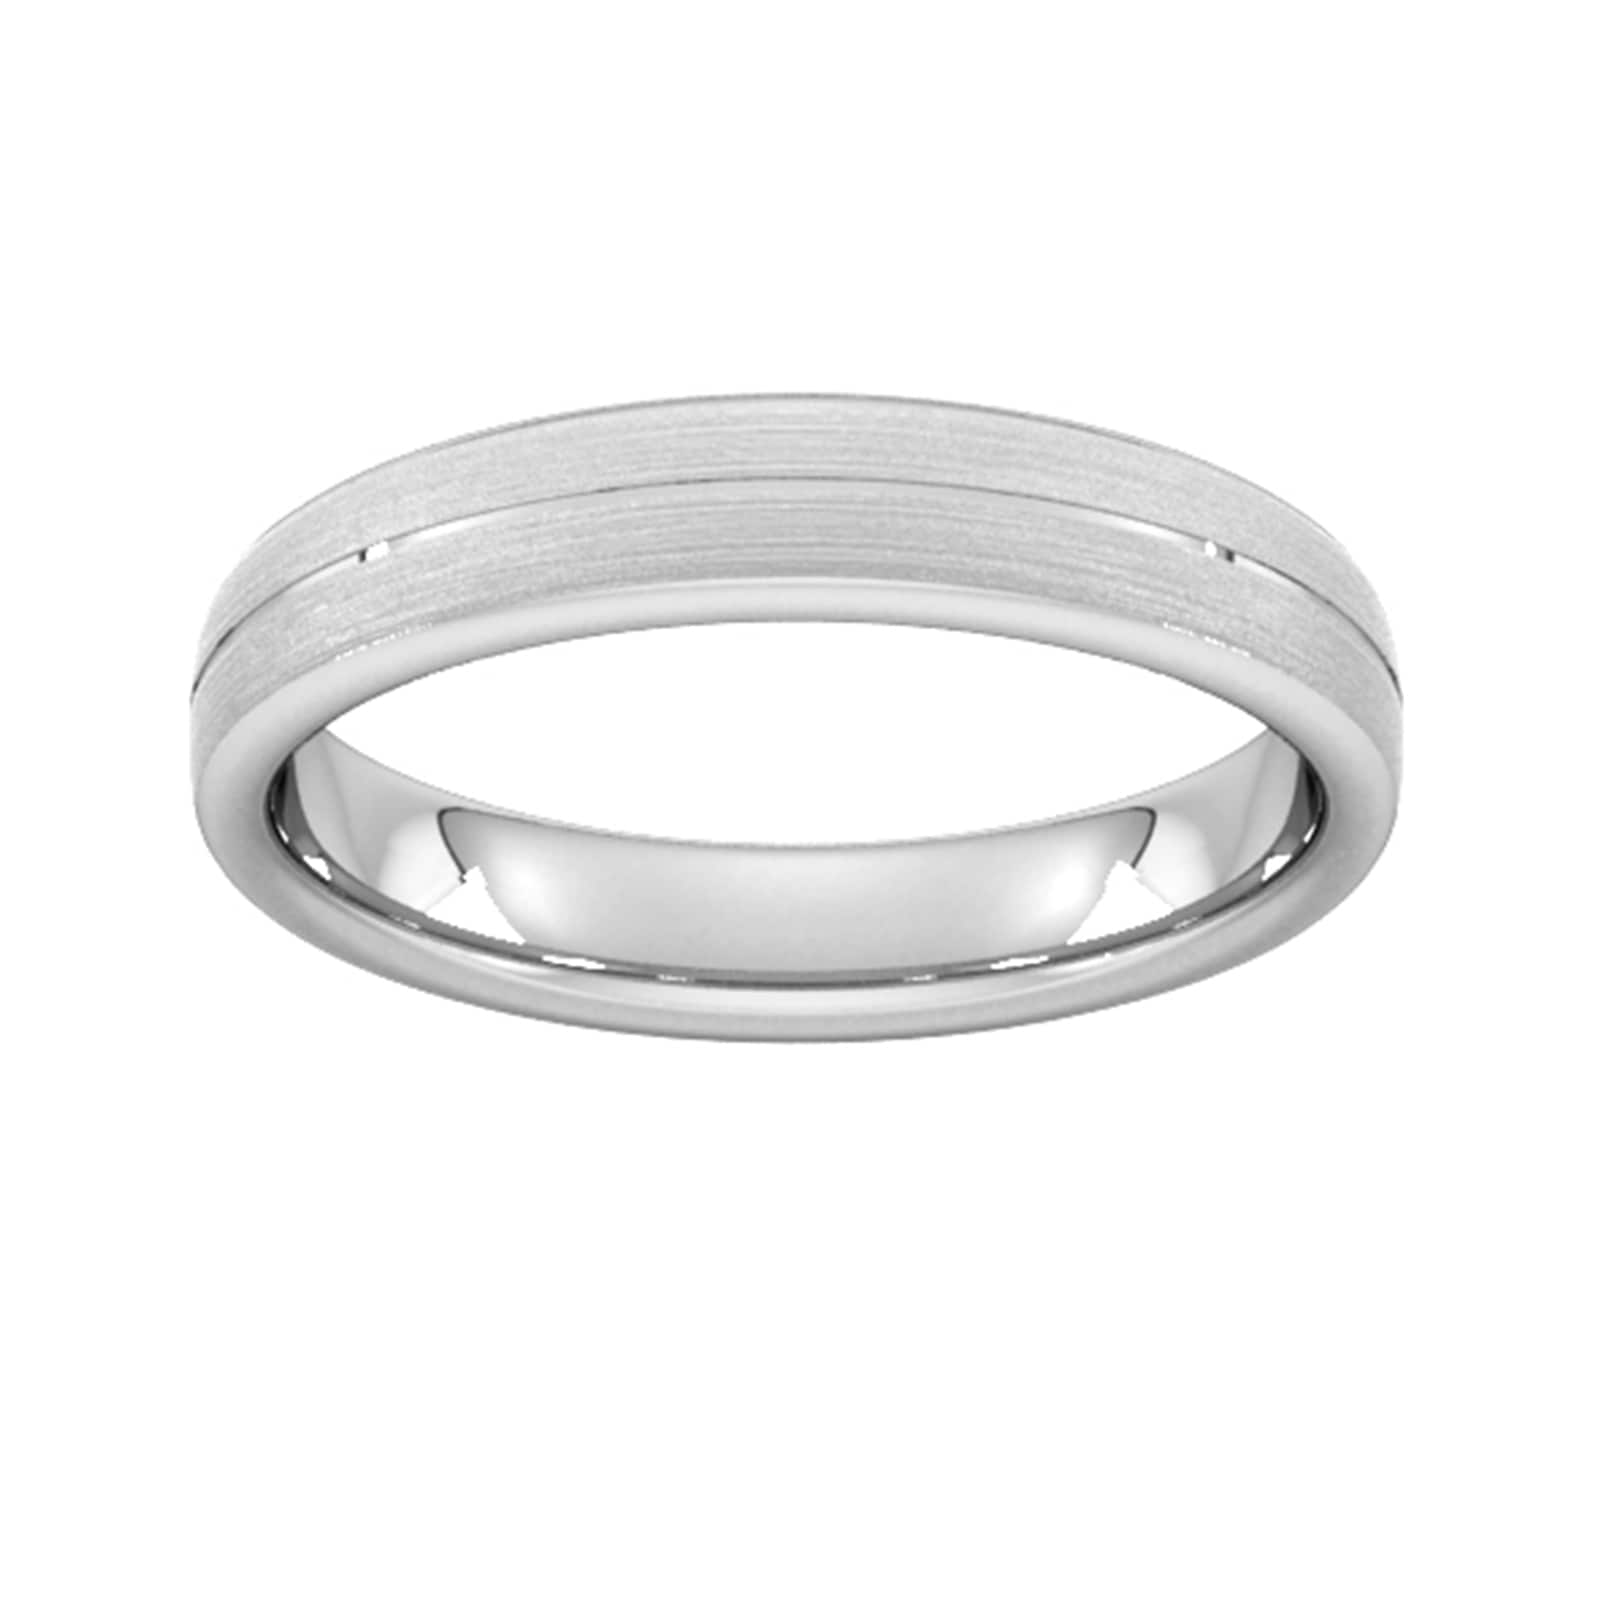 4mm D Shape Standard Centre Groove With Chamfered Edge Wedding Ring In 9 Carat White Gold - Ring Size I